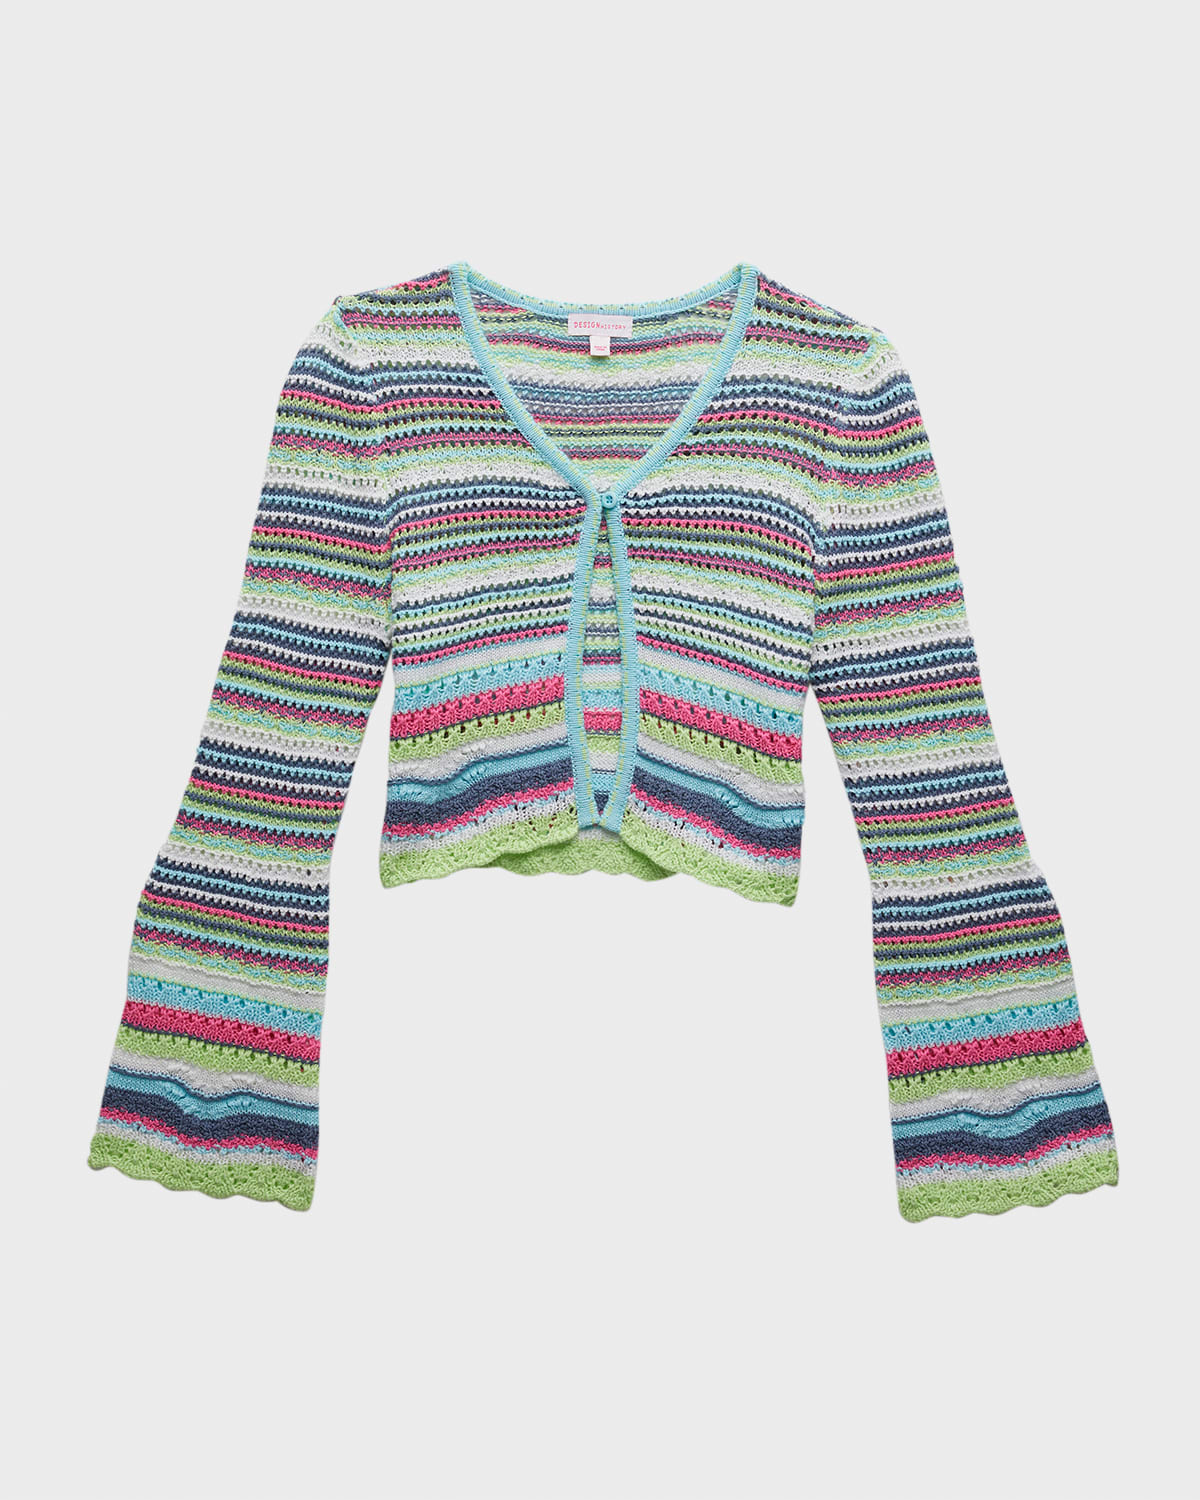 Girl's Multicolor Bell Sleeves Crotched Cardigan, Size S-XL